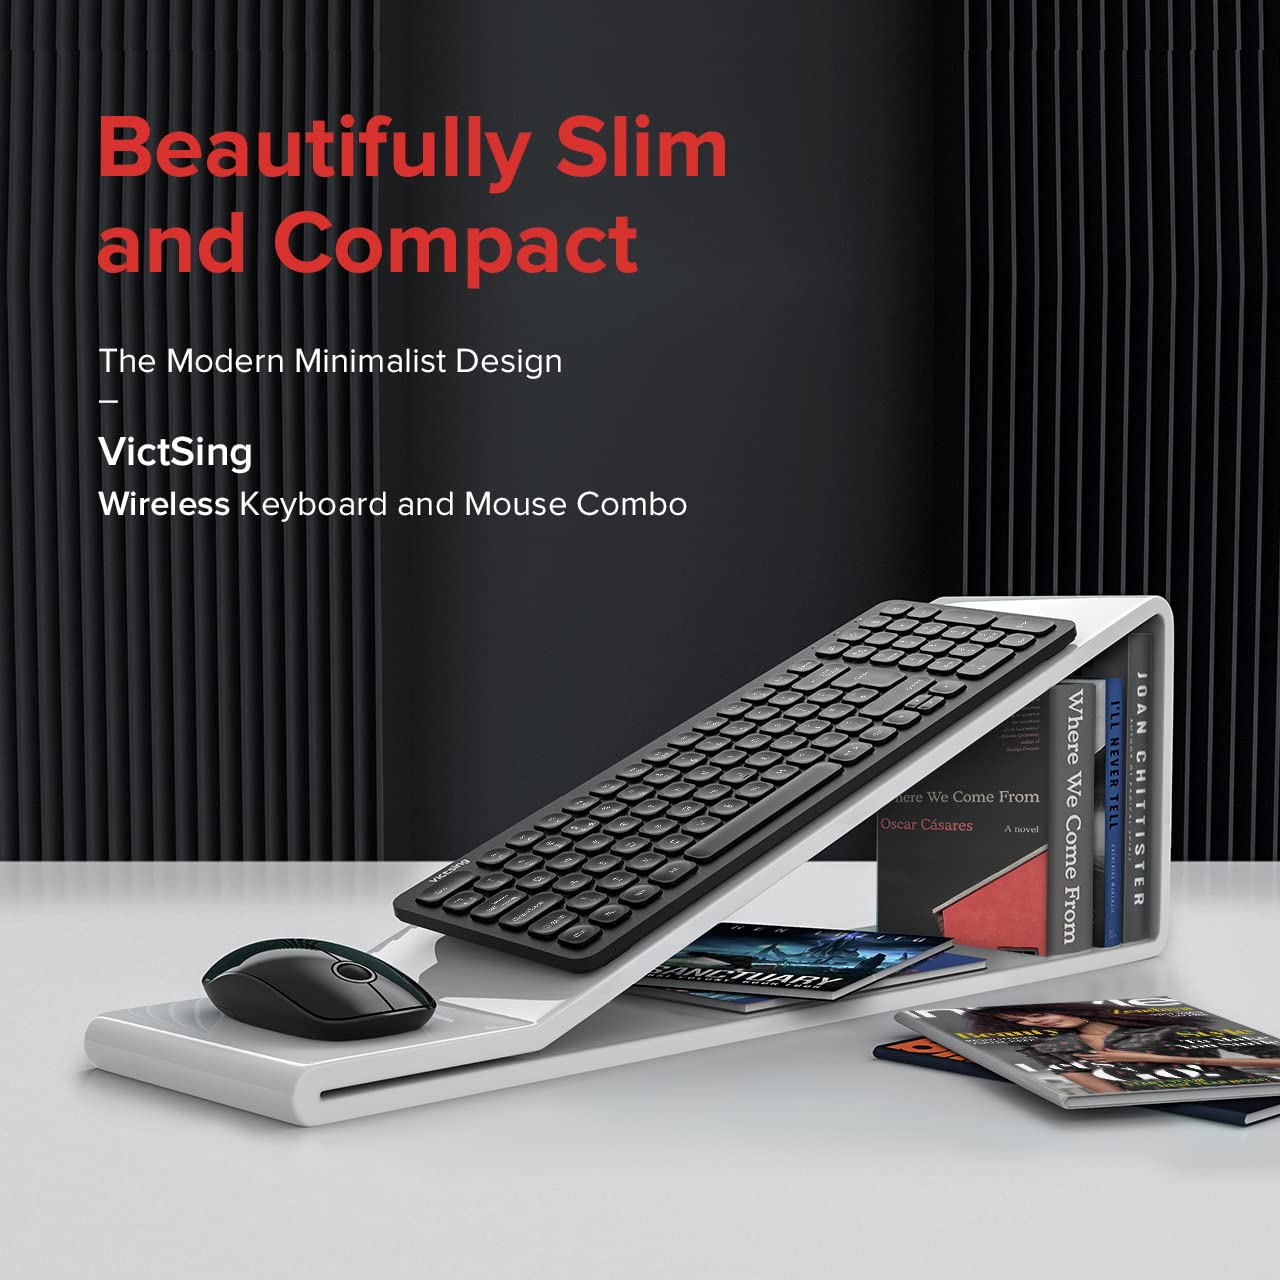 Victsing Wireless Keyboard and Mouse Combo, 2.4G Ultra Slim Keyboard and Mouse Set, 98% Noise Reduction, Energy-saving, 4 Separate Multimedia Keys, for PC Laptop Mac iMac Windows